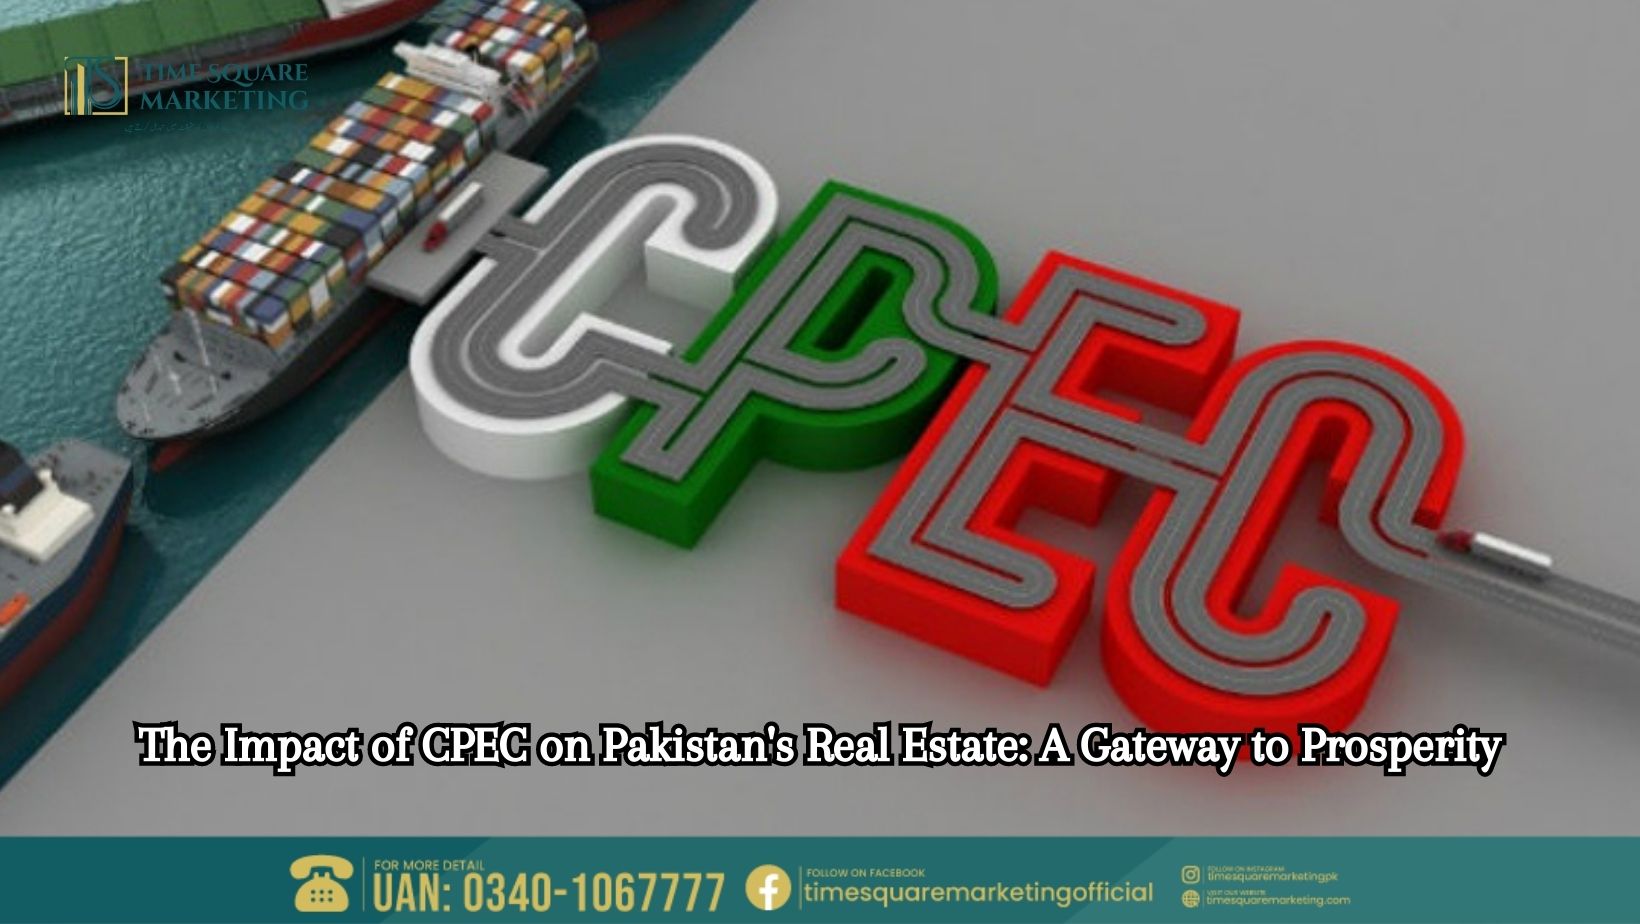 The Impact of CPEC on Pakistan's Real Estate A Gateway to Prosperity